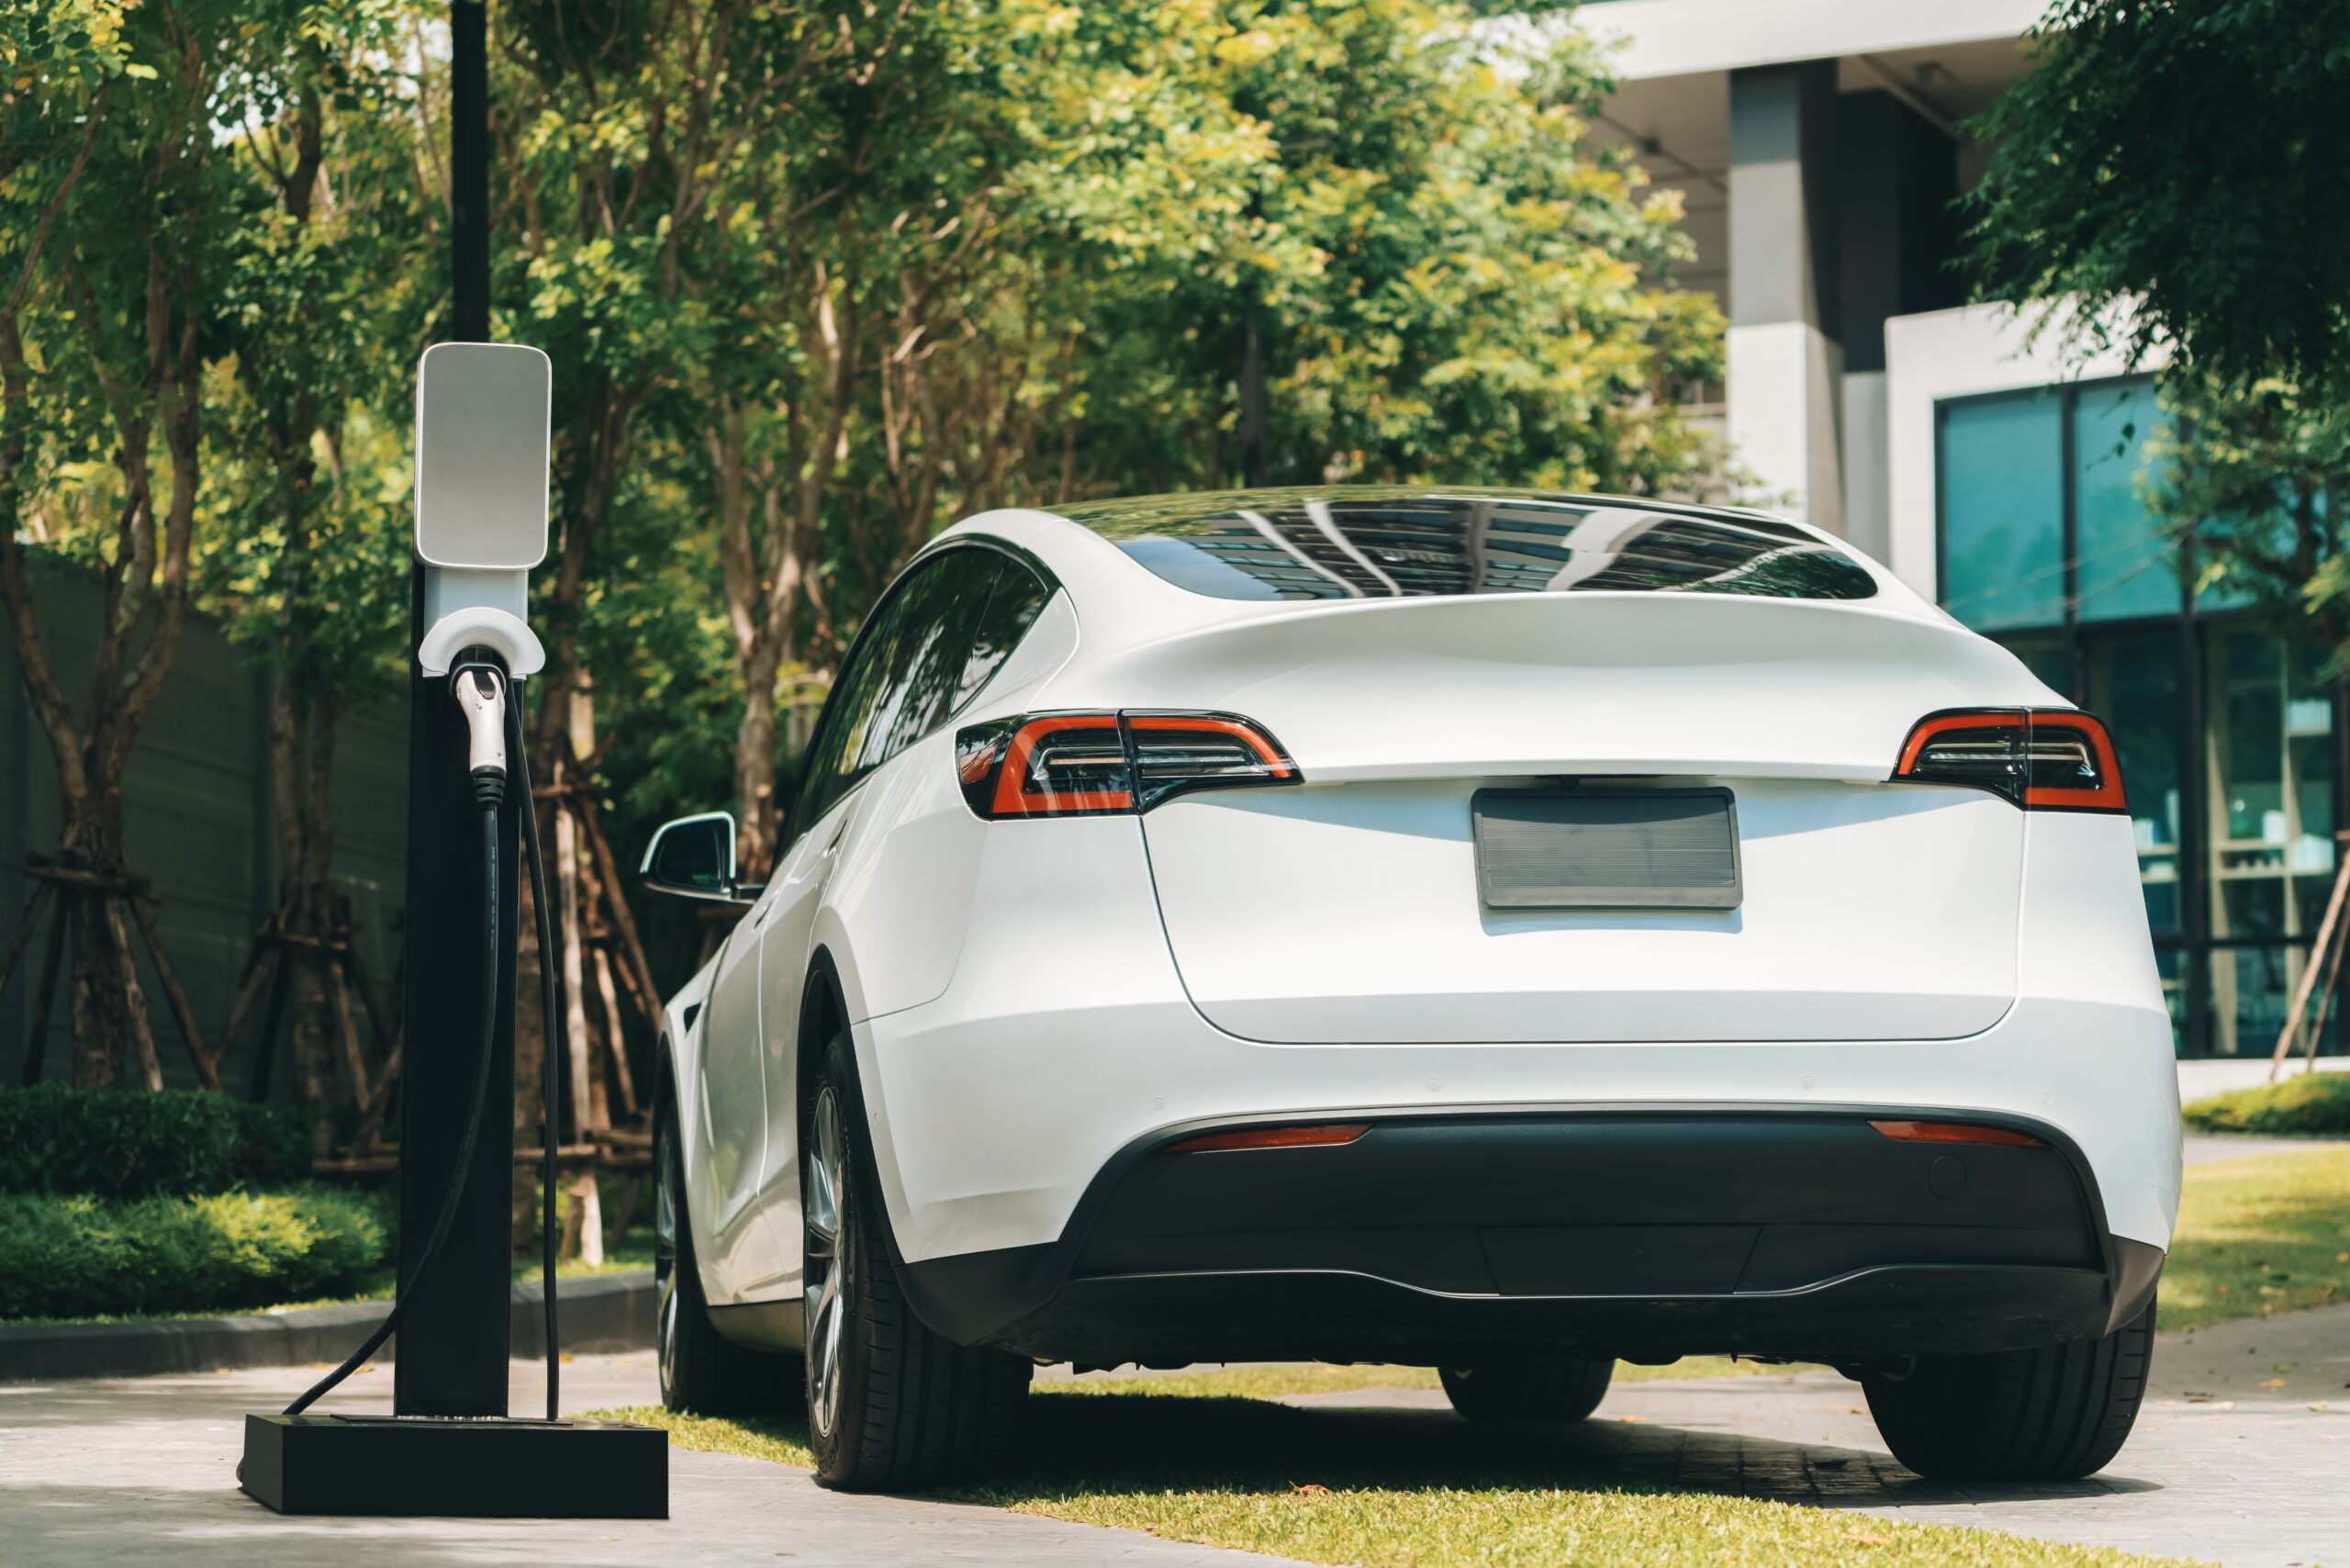 Don’t miss triggers for new EV Charging in a Parking Lot project